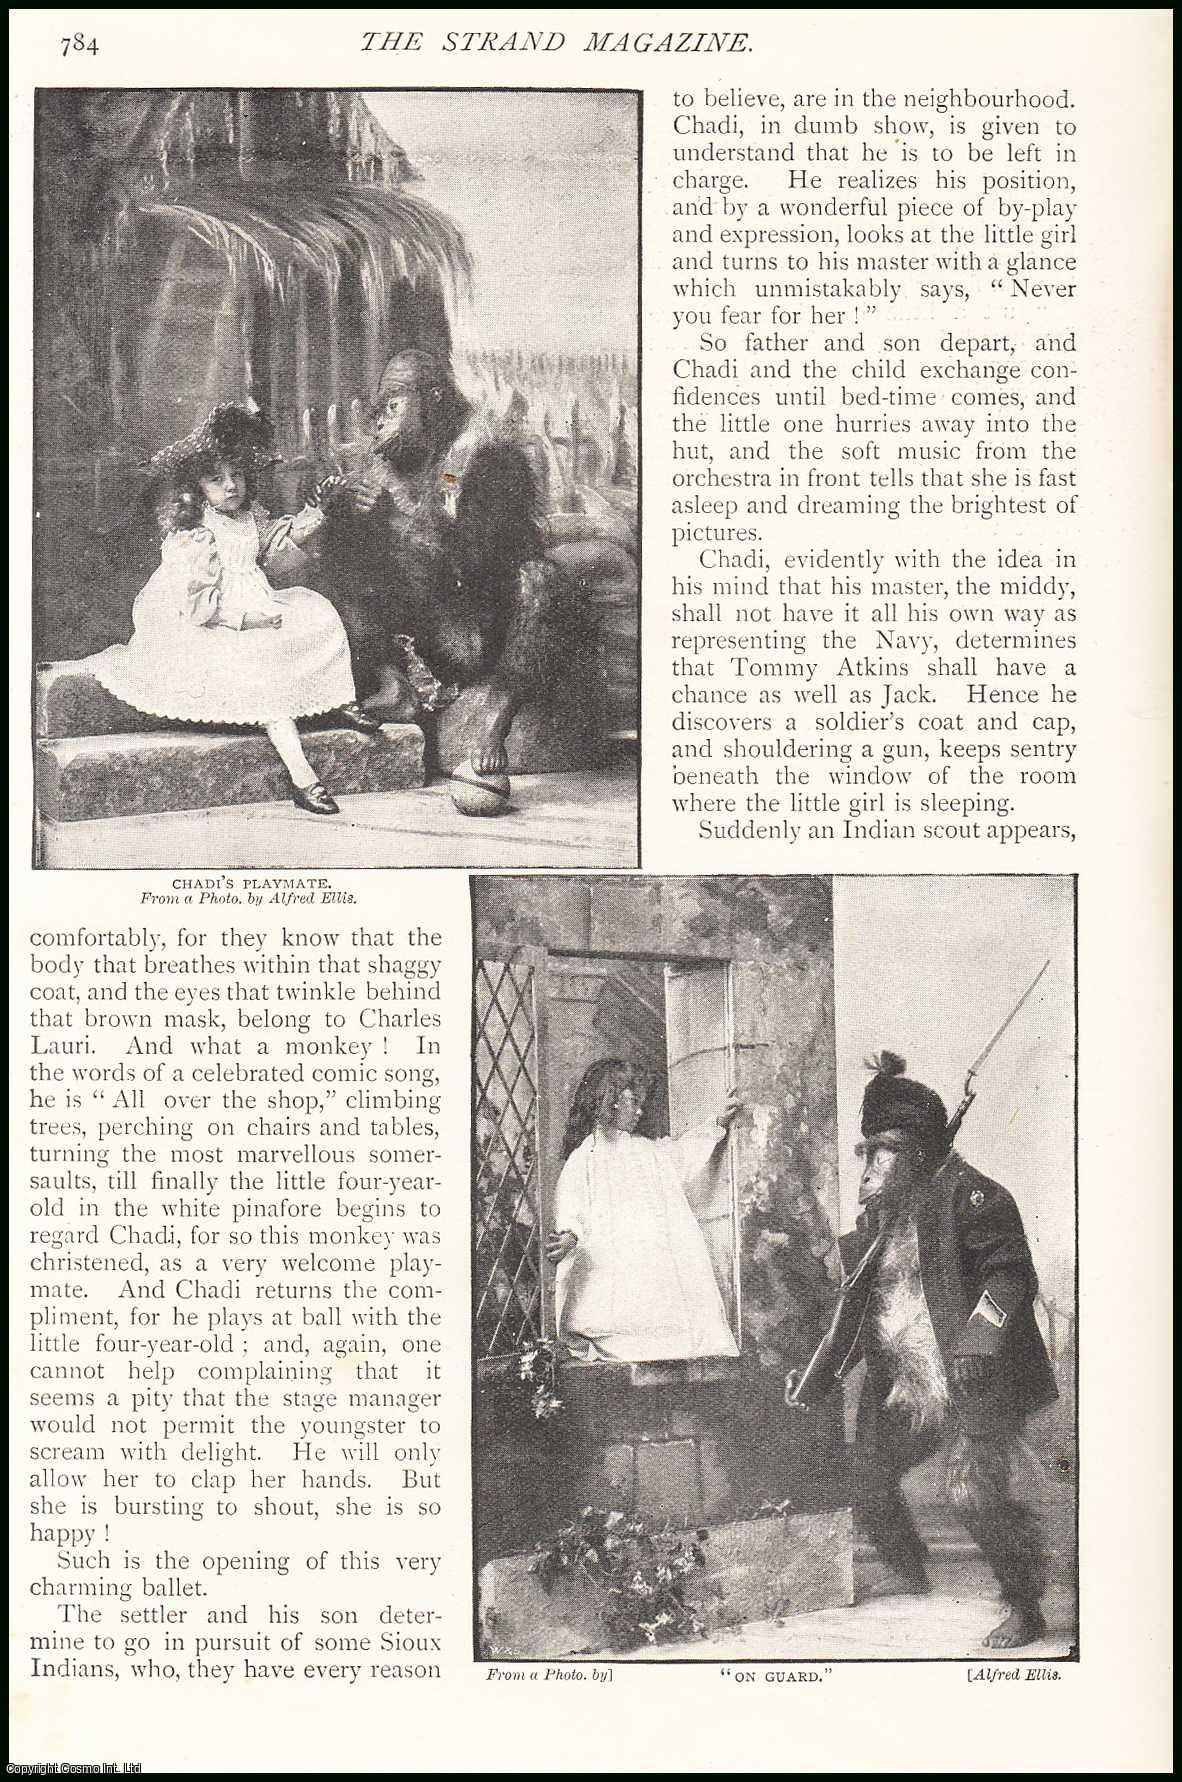 Harry How - Mr. Charles Lauri, animal Actor : An Interview. An uncommon original article from The Strand Magazine, 1895.